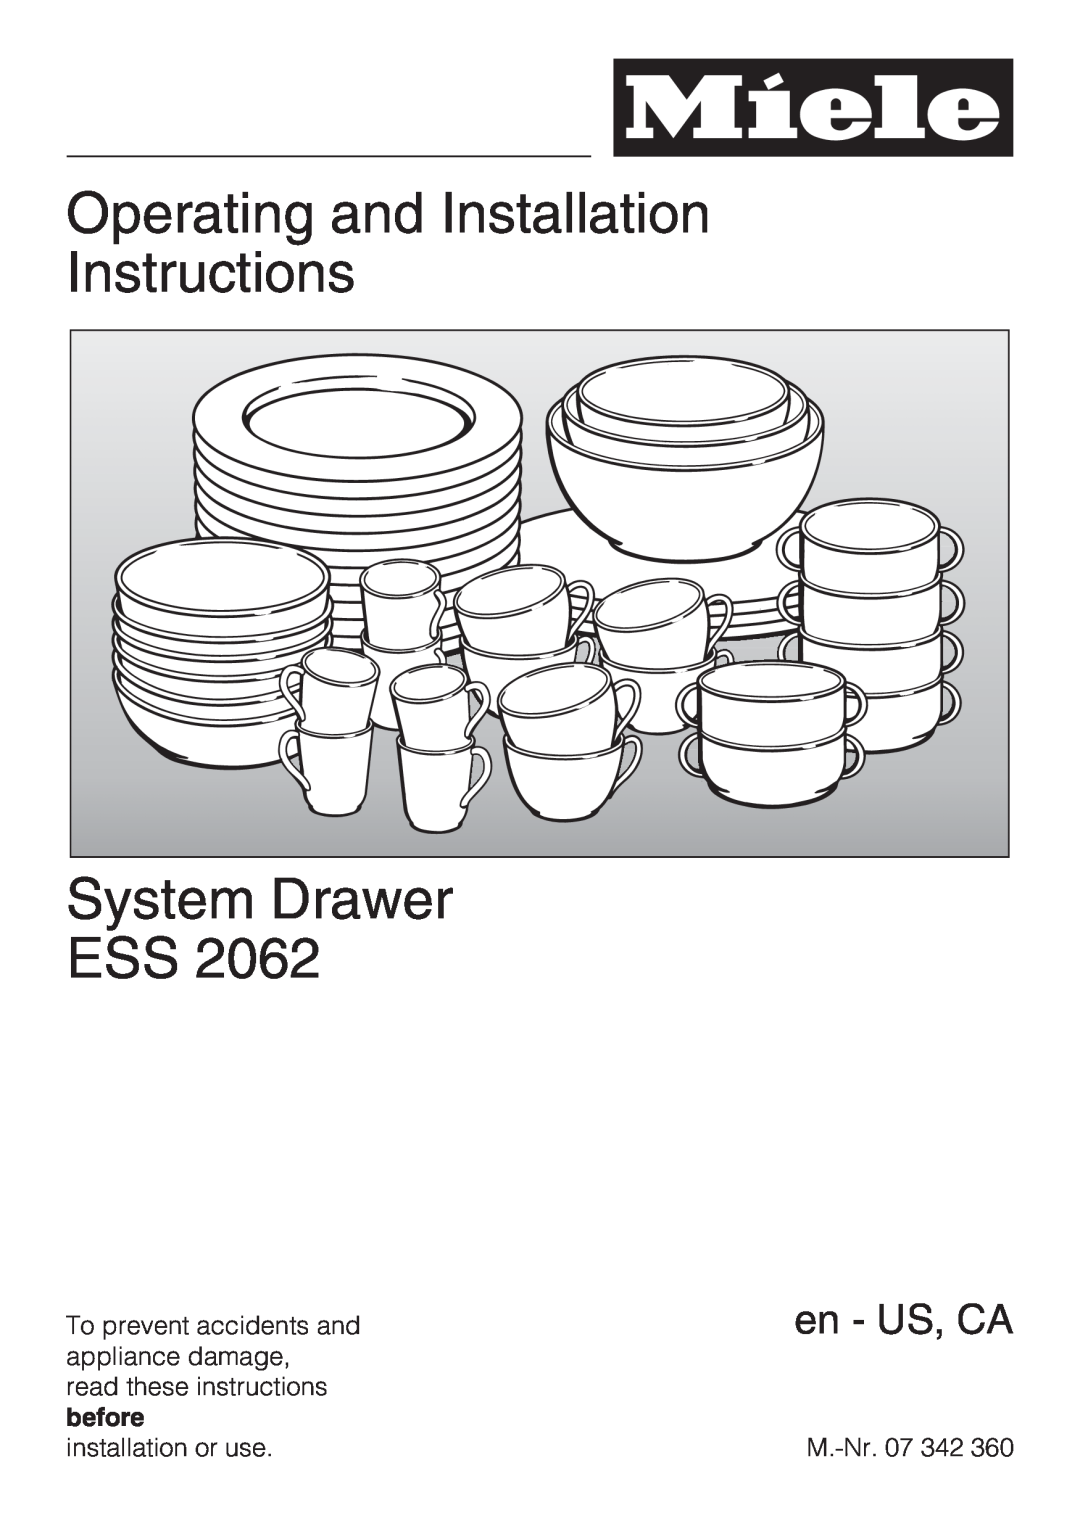 Miele ESS 2062 installation instructions Operating and Installation Instructions, System Drawer ESS, en - US, CA 